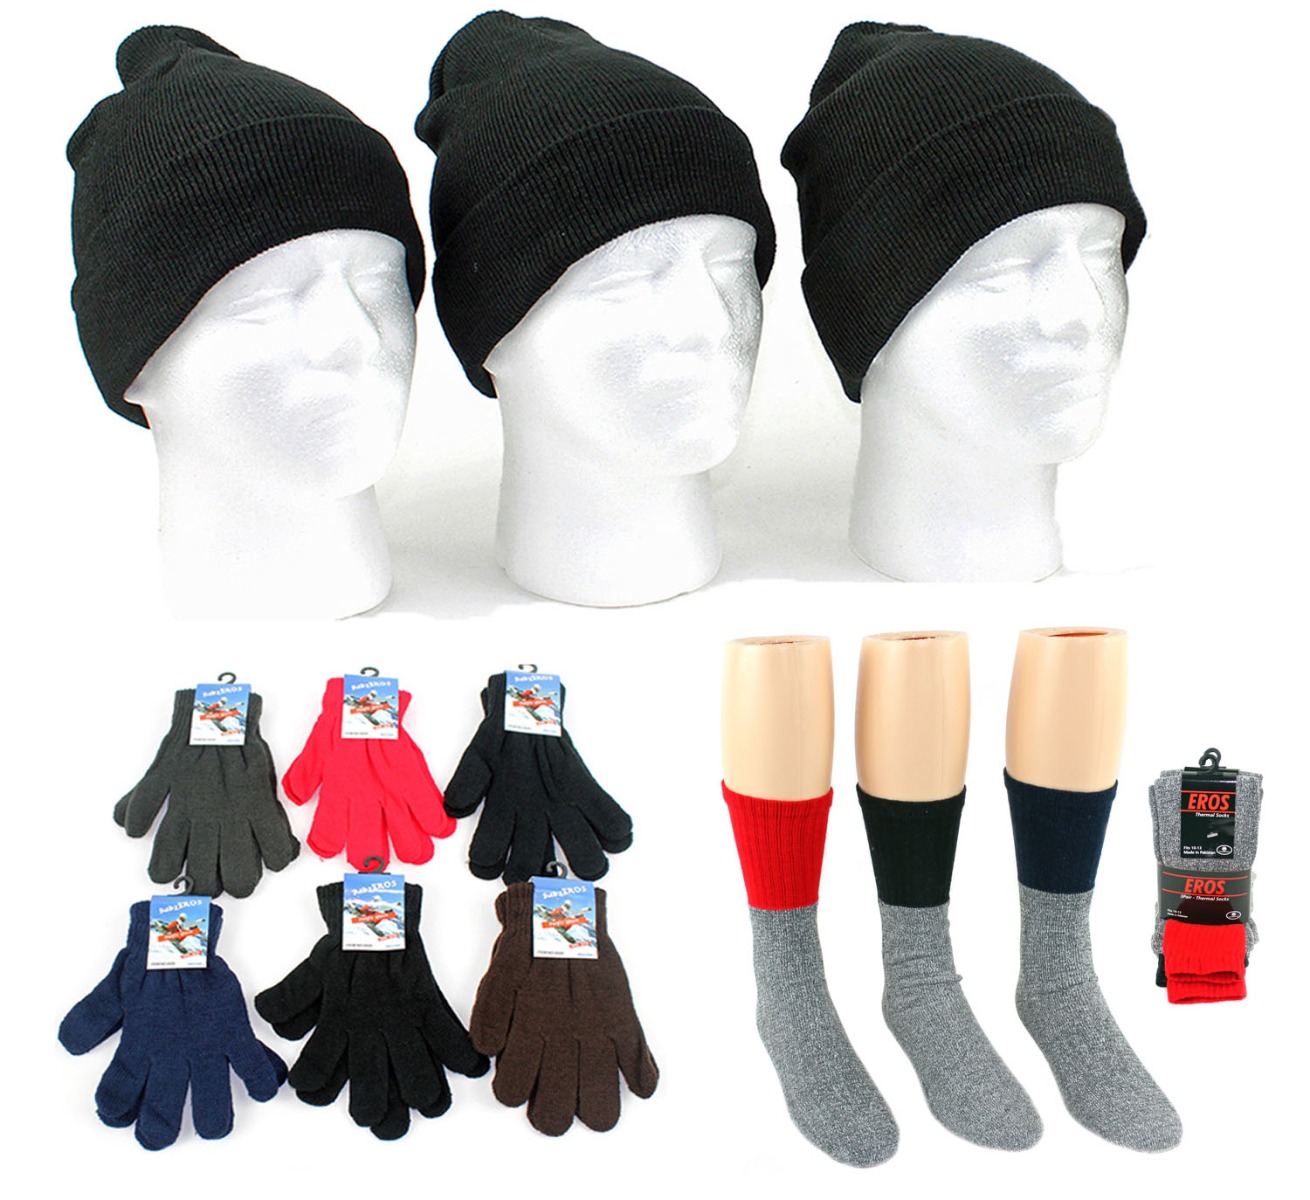 ''Adult Cuffed Winter Knit HATs, Adult Magic Gloves, and Men's Thermal Crew Socks Combo''